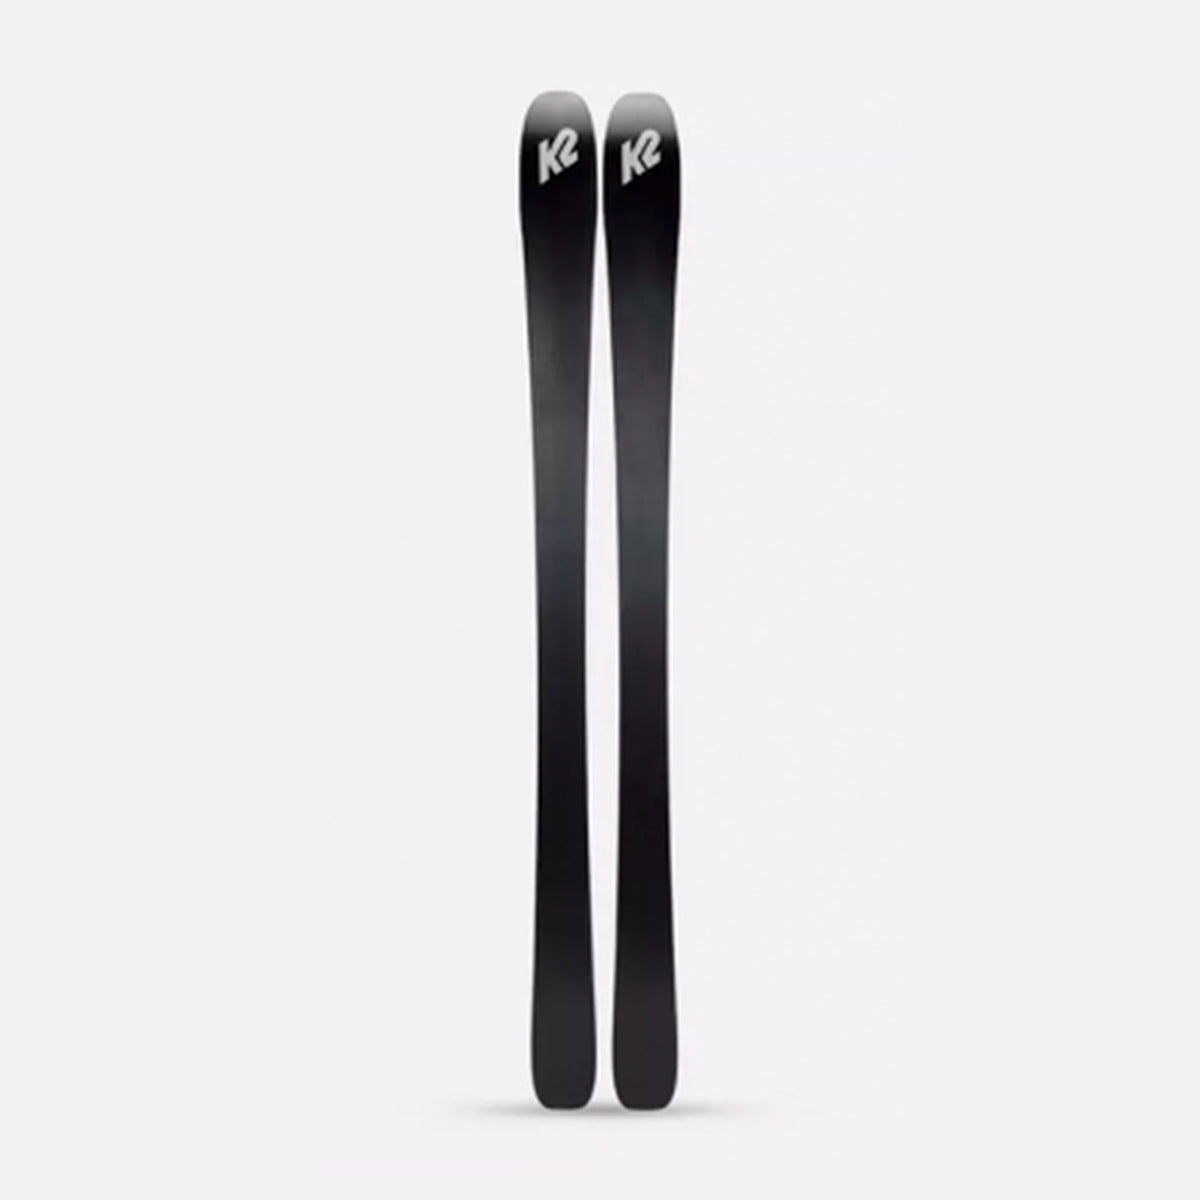 Image features the bottom of the Men's K2 Mindbender 85 ski's in black with white K2 logos on the tips.